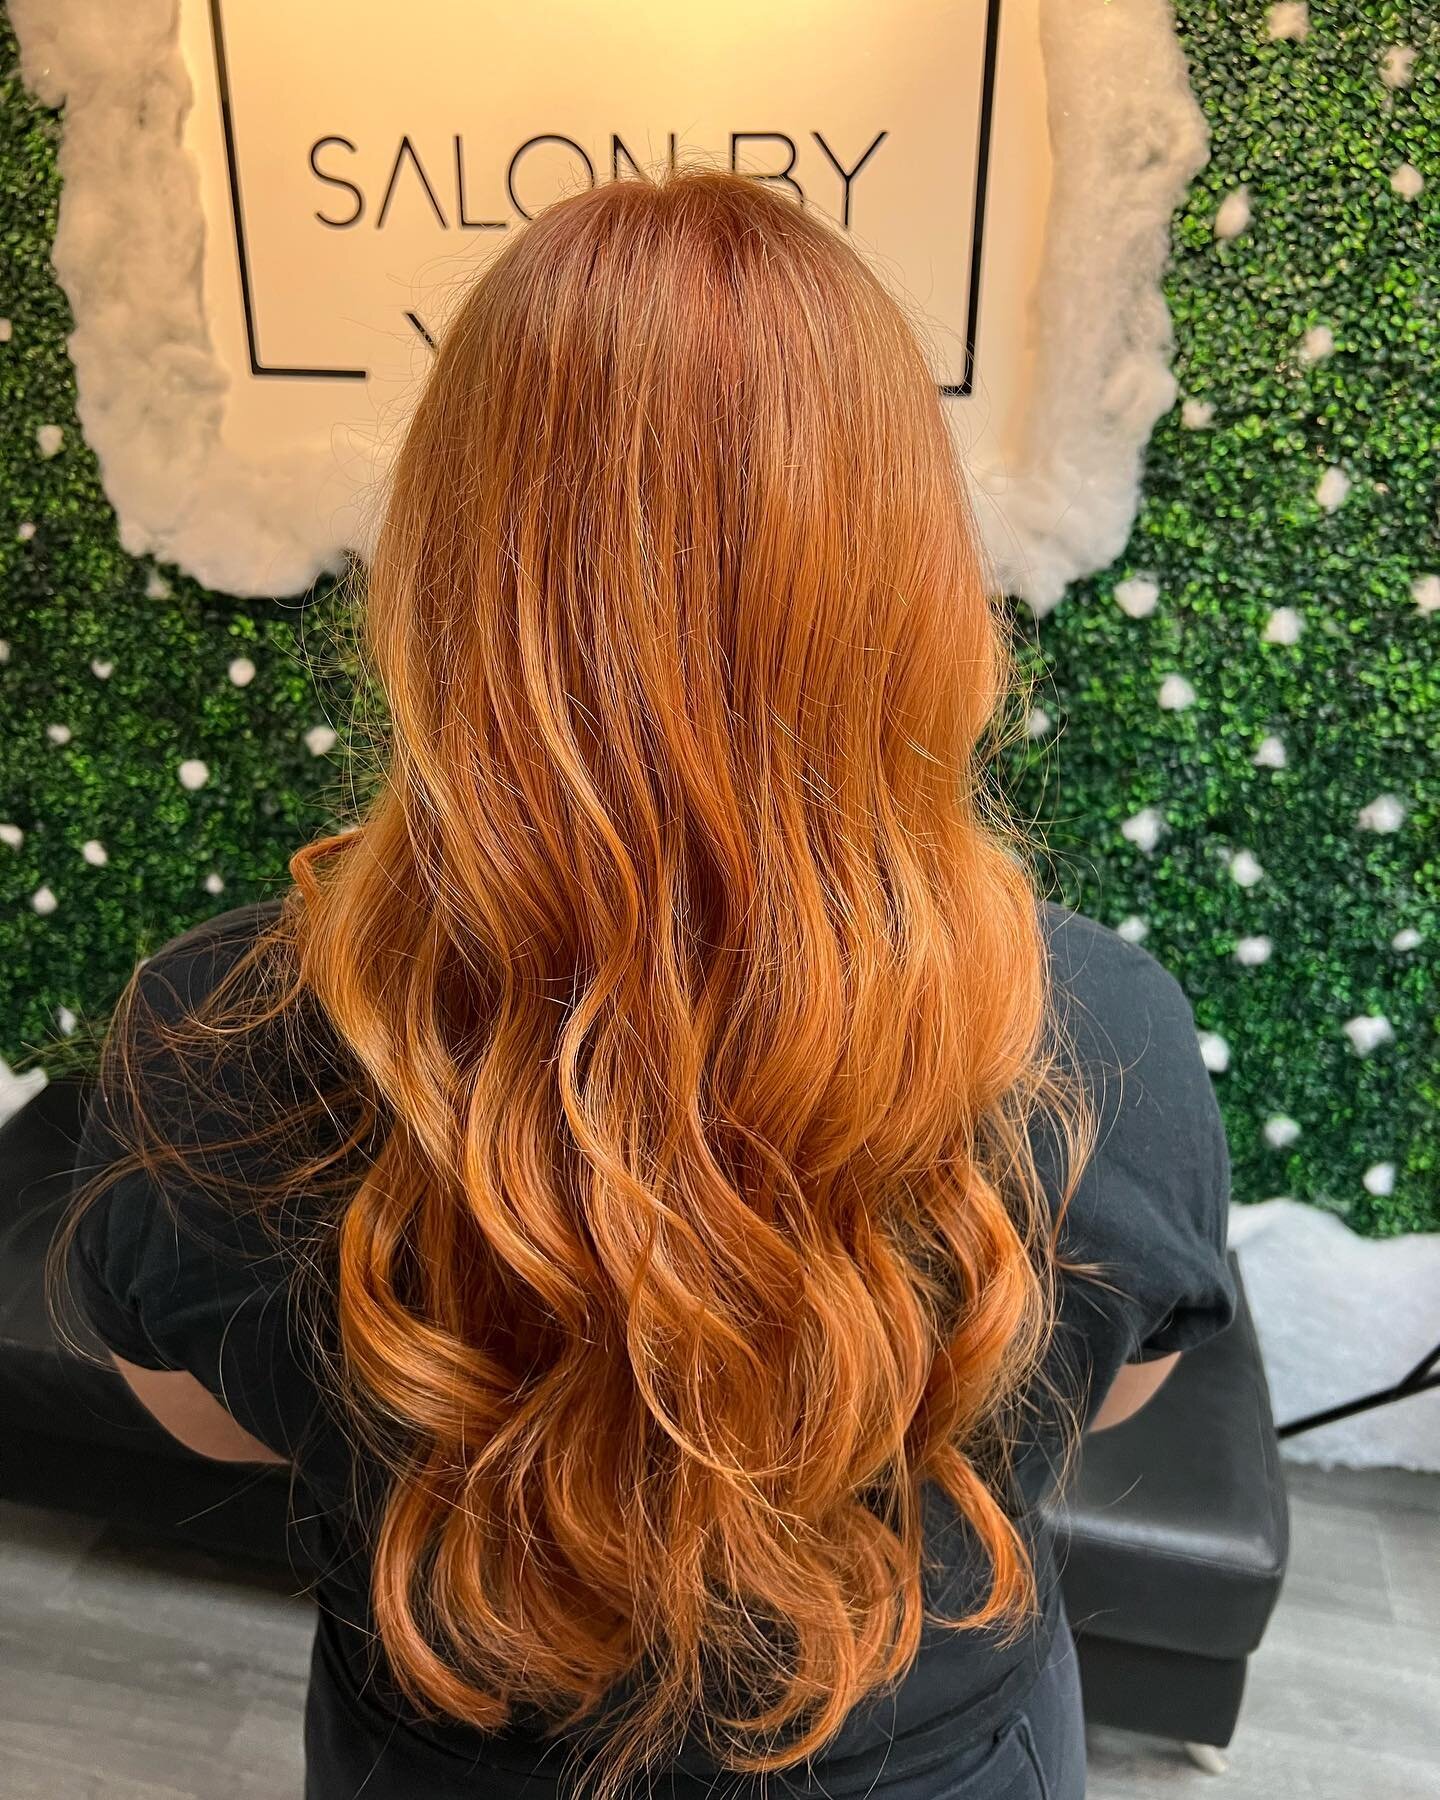 Copper orange 🍊 

Hair done by @hair_by_alyssak 

#salonbyyoo #onlyou

For customer satisfaction, a 1:1 consultation will be performed before any service.

For appointment/consultation
DM / call at 8089551600
Email info@salonbyyoo.com
Www.salonbyyoo